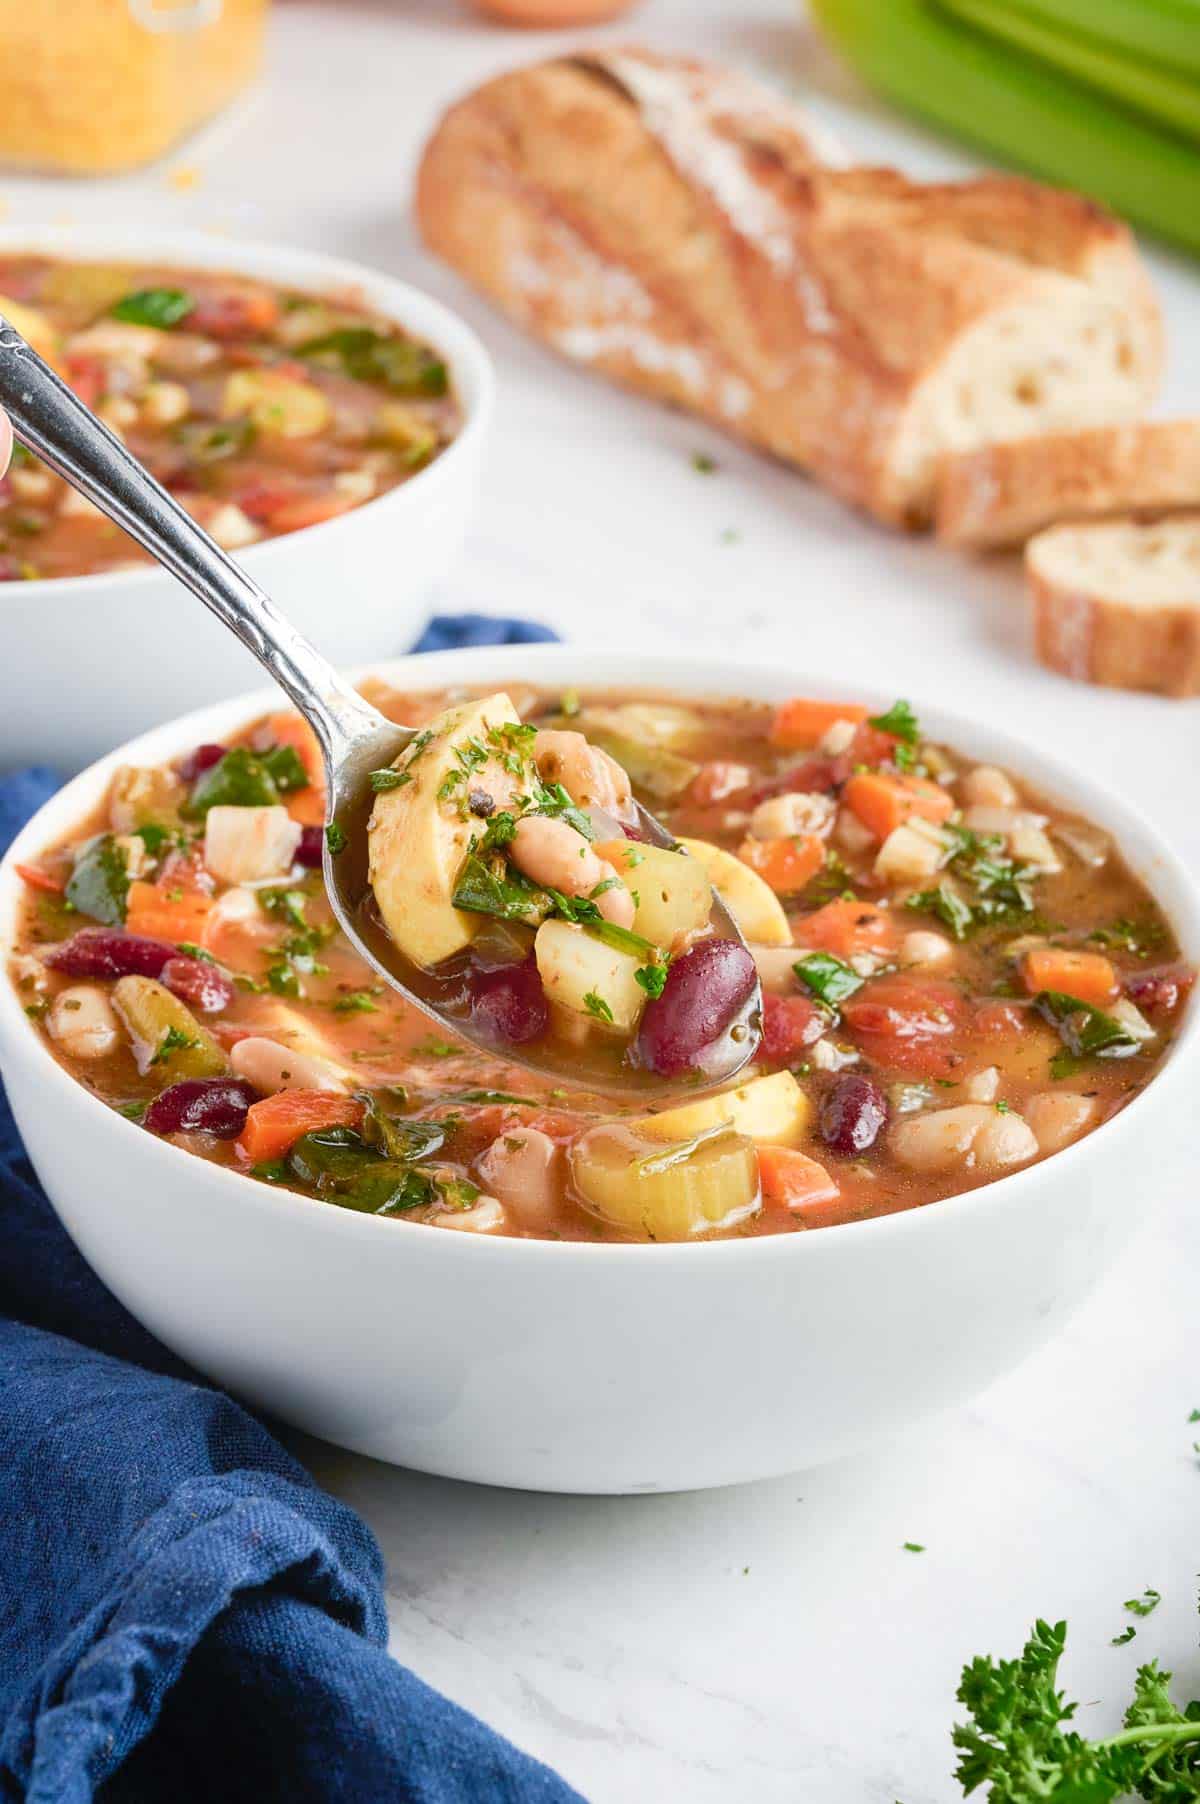 A spoonful of minestrone is enjoyed with fresh bread.